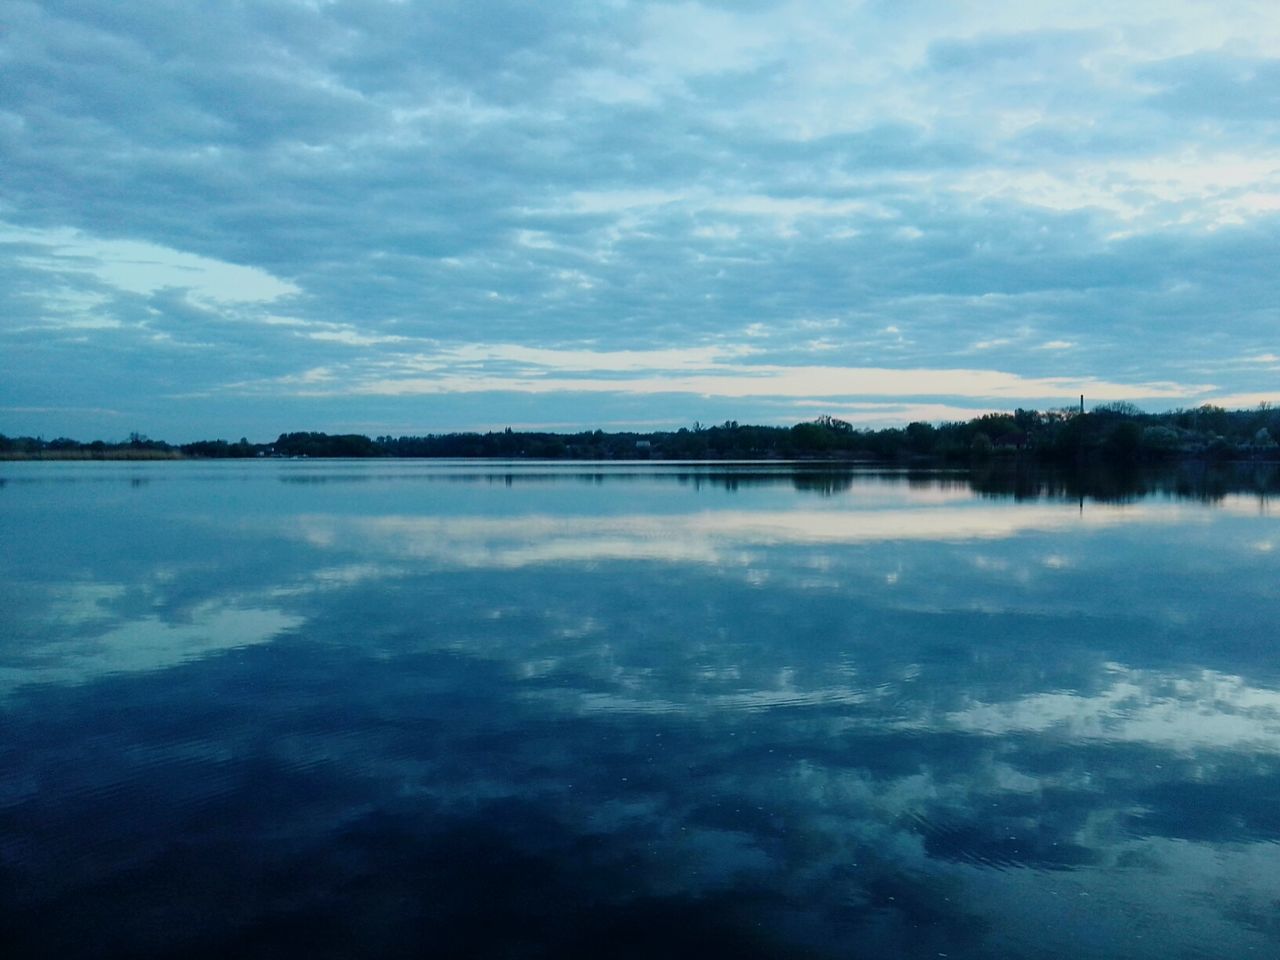 sky, tranquil scene, tranquility, scenics, cloud - sky, water, beauty in nature, reflection, lake, cloudy, nature, cloud, waterfront, idyllic, blue, calm, weather, outdoors, cloudscape, no people